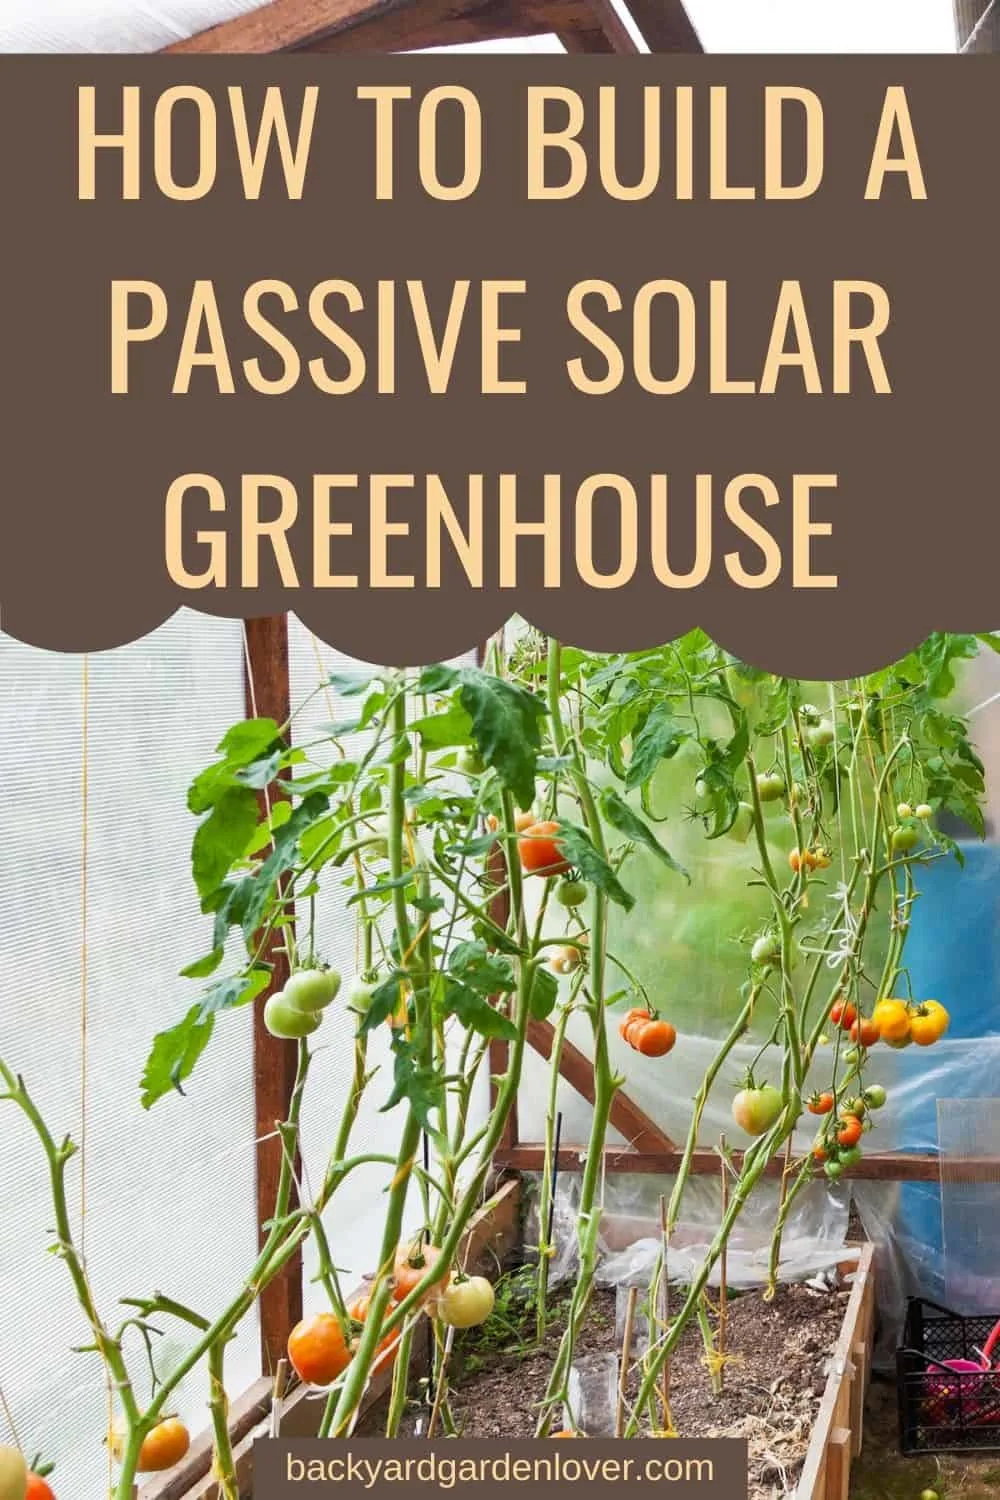 How to build a passive solar greenhouse - Pinterest image